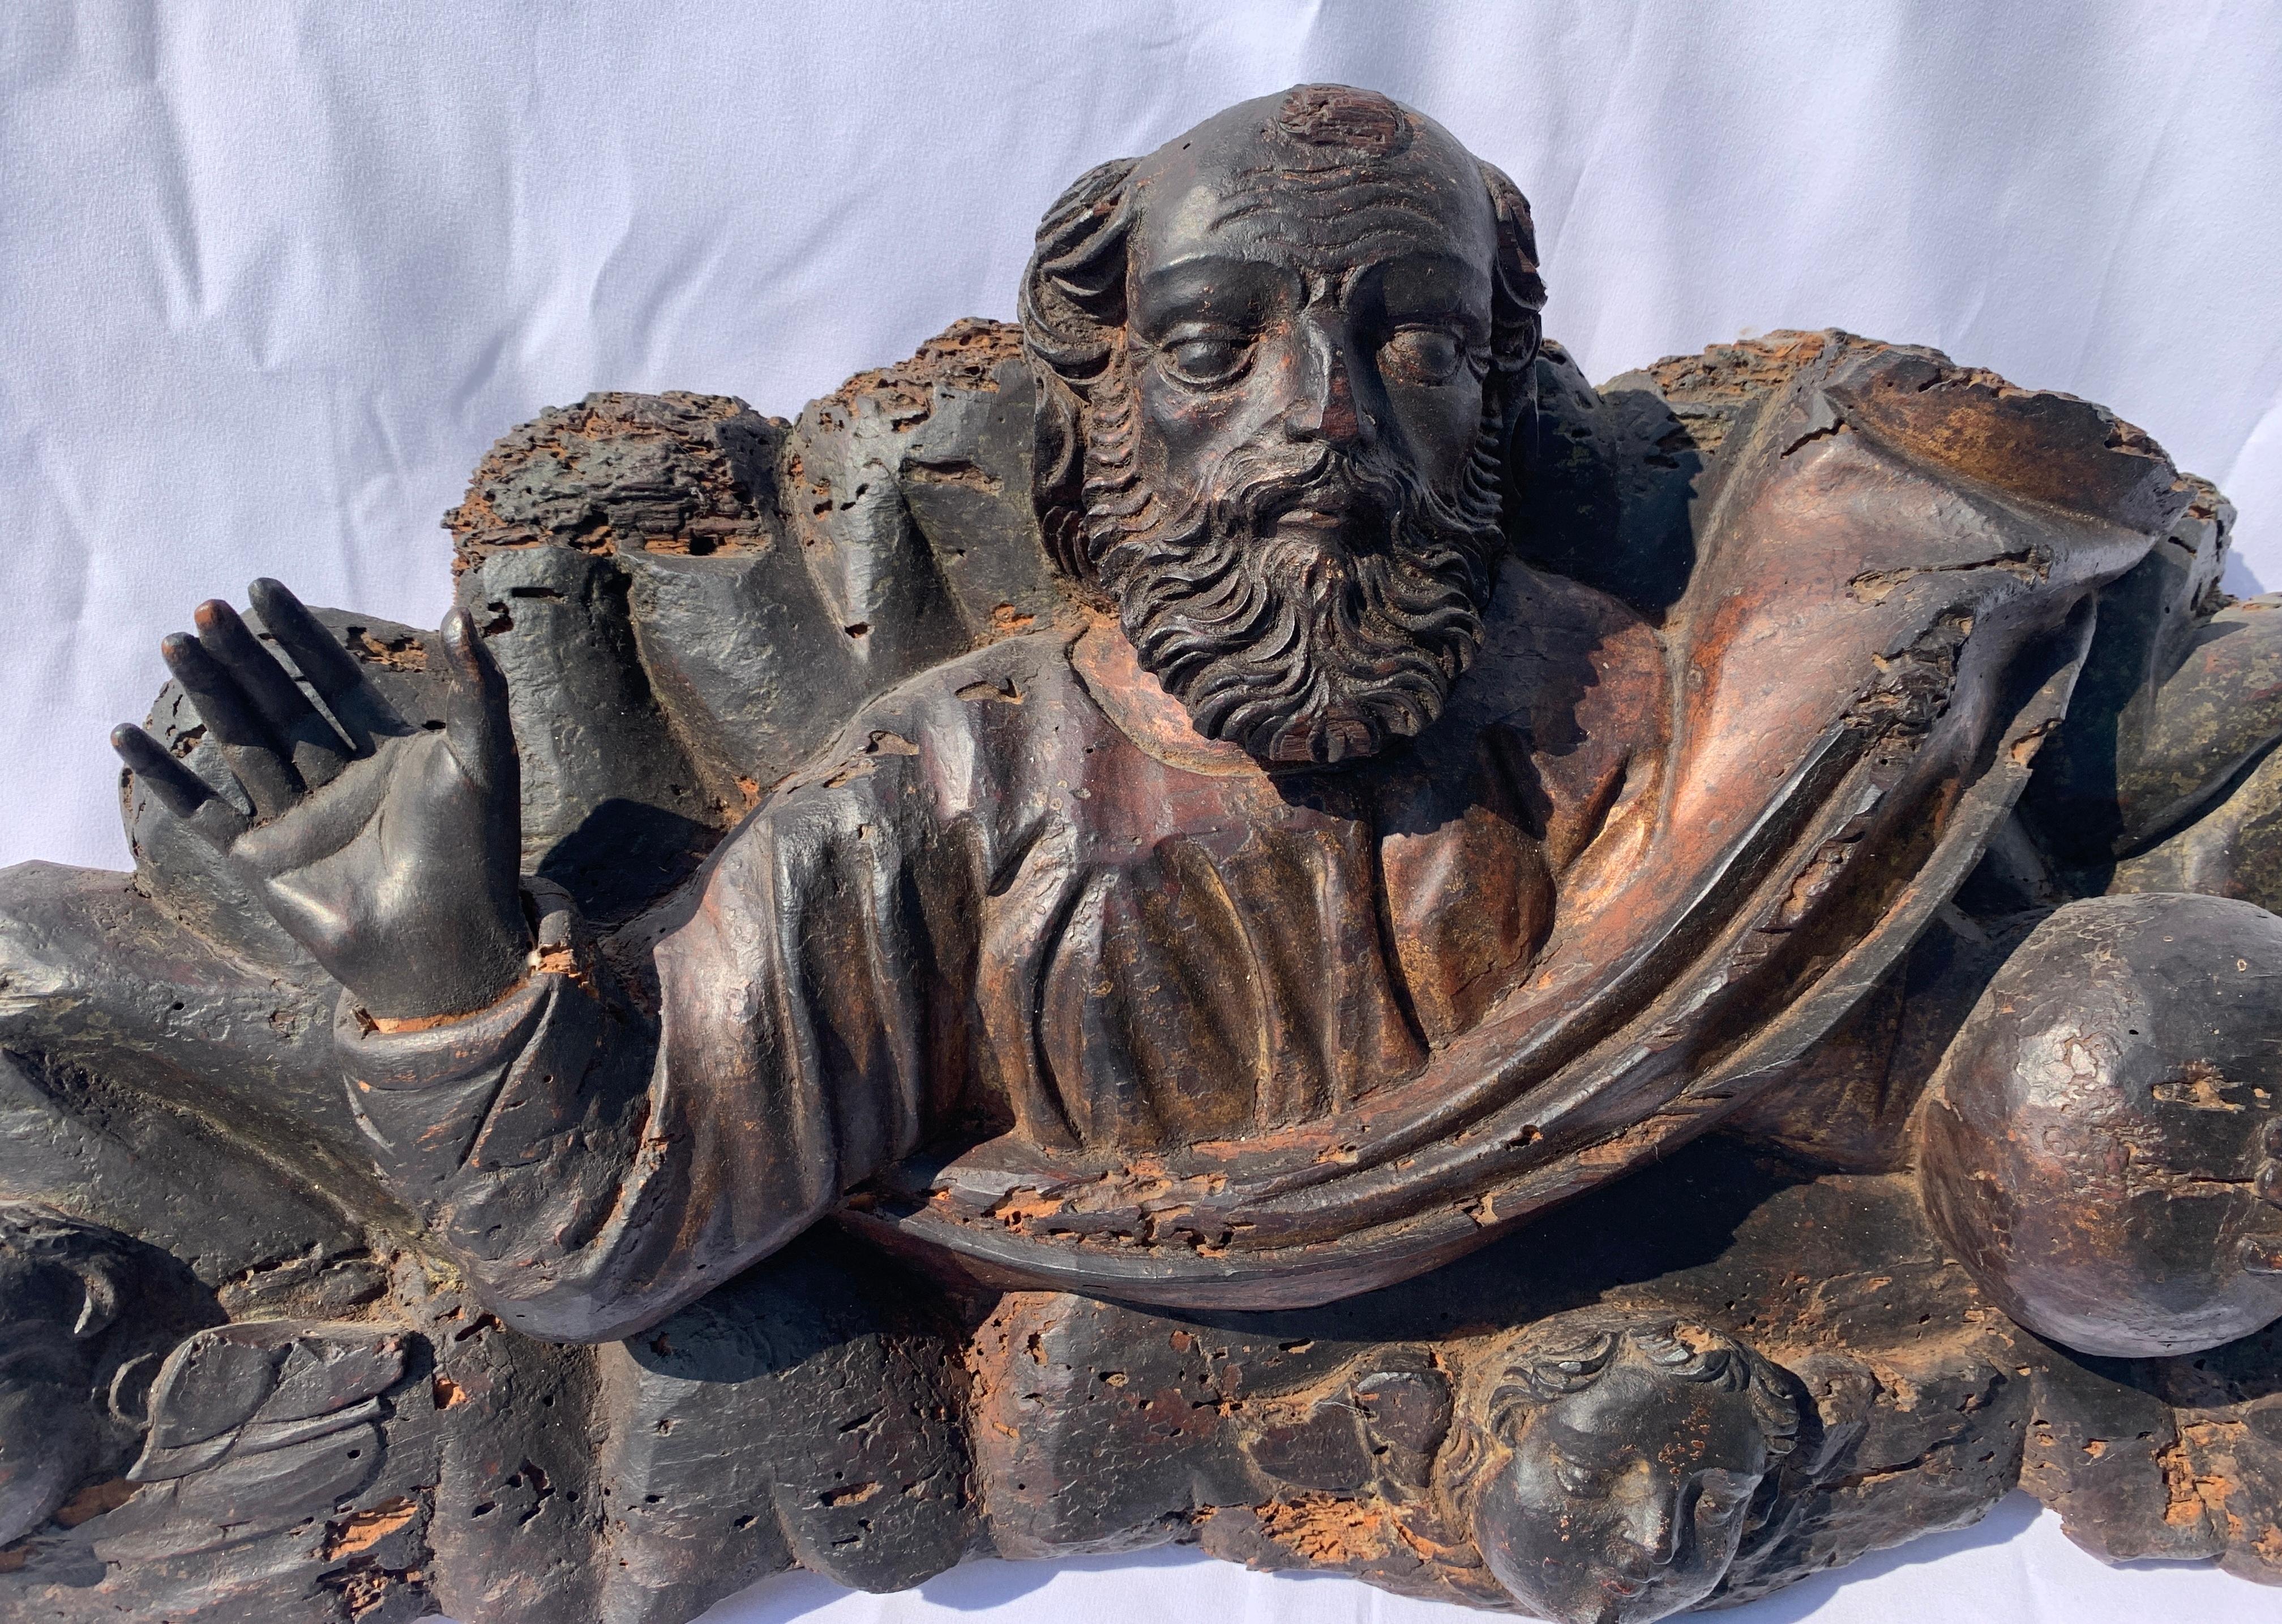 Baroque Italian Sculptor - 17th century carved wood sculpture - God father - Old Masters Sculpture by Unknown